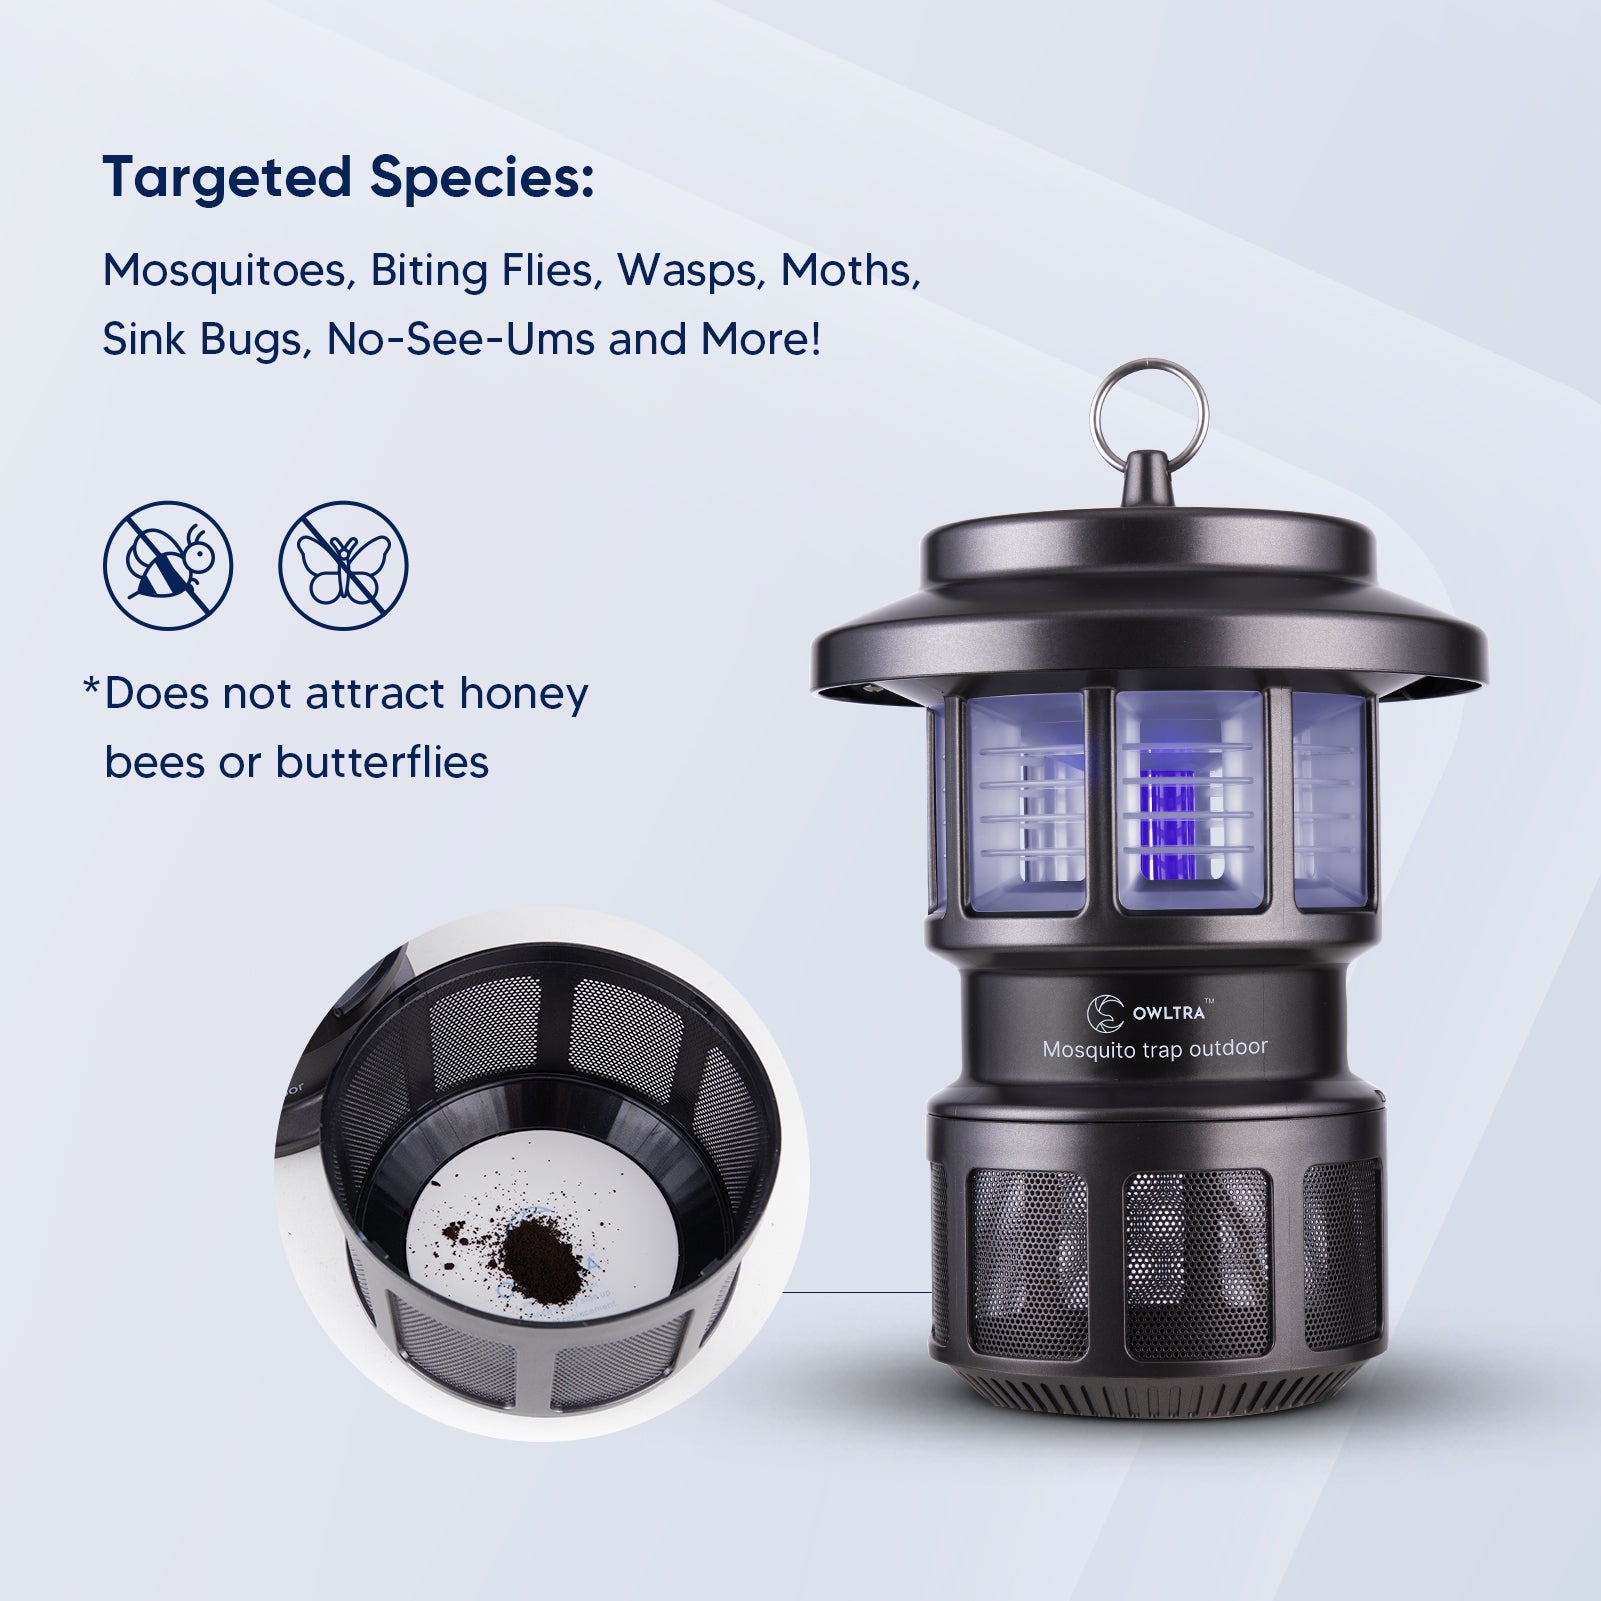 OMT-L20 Outdoor Electronic Insect Trap